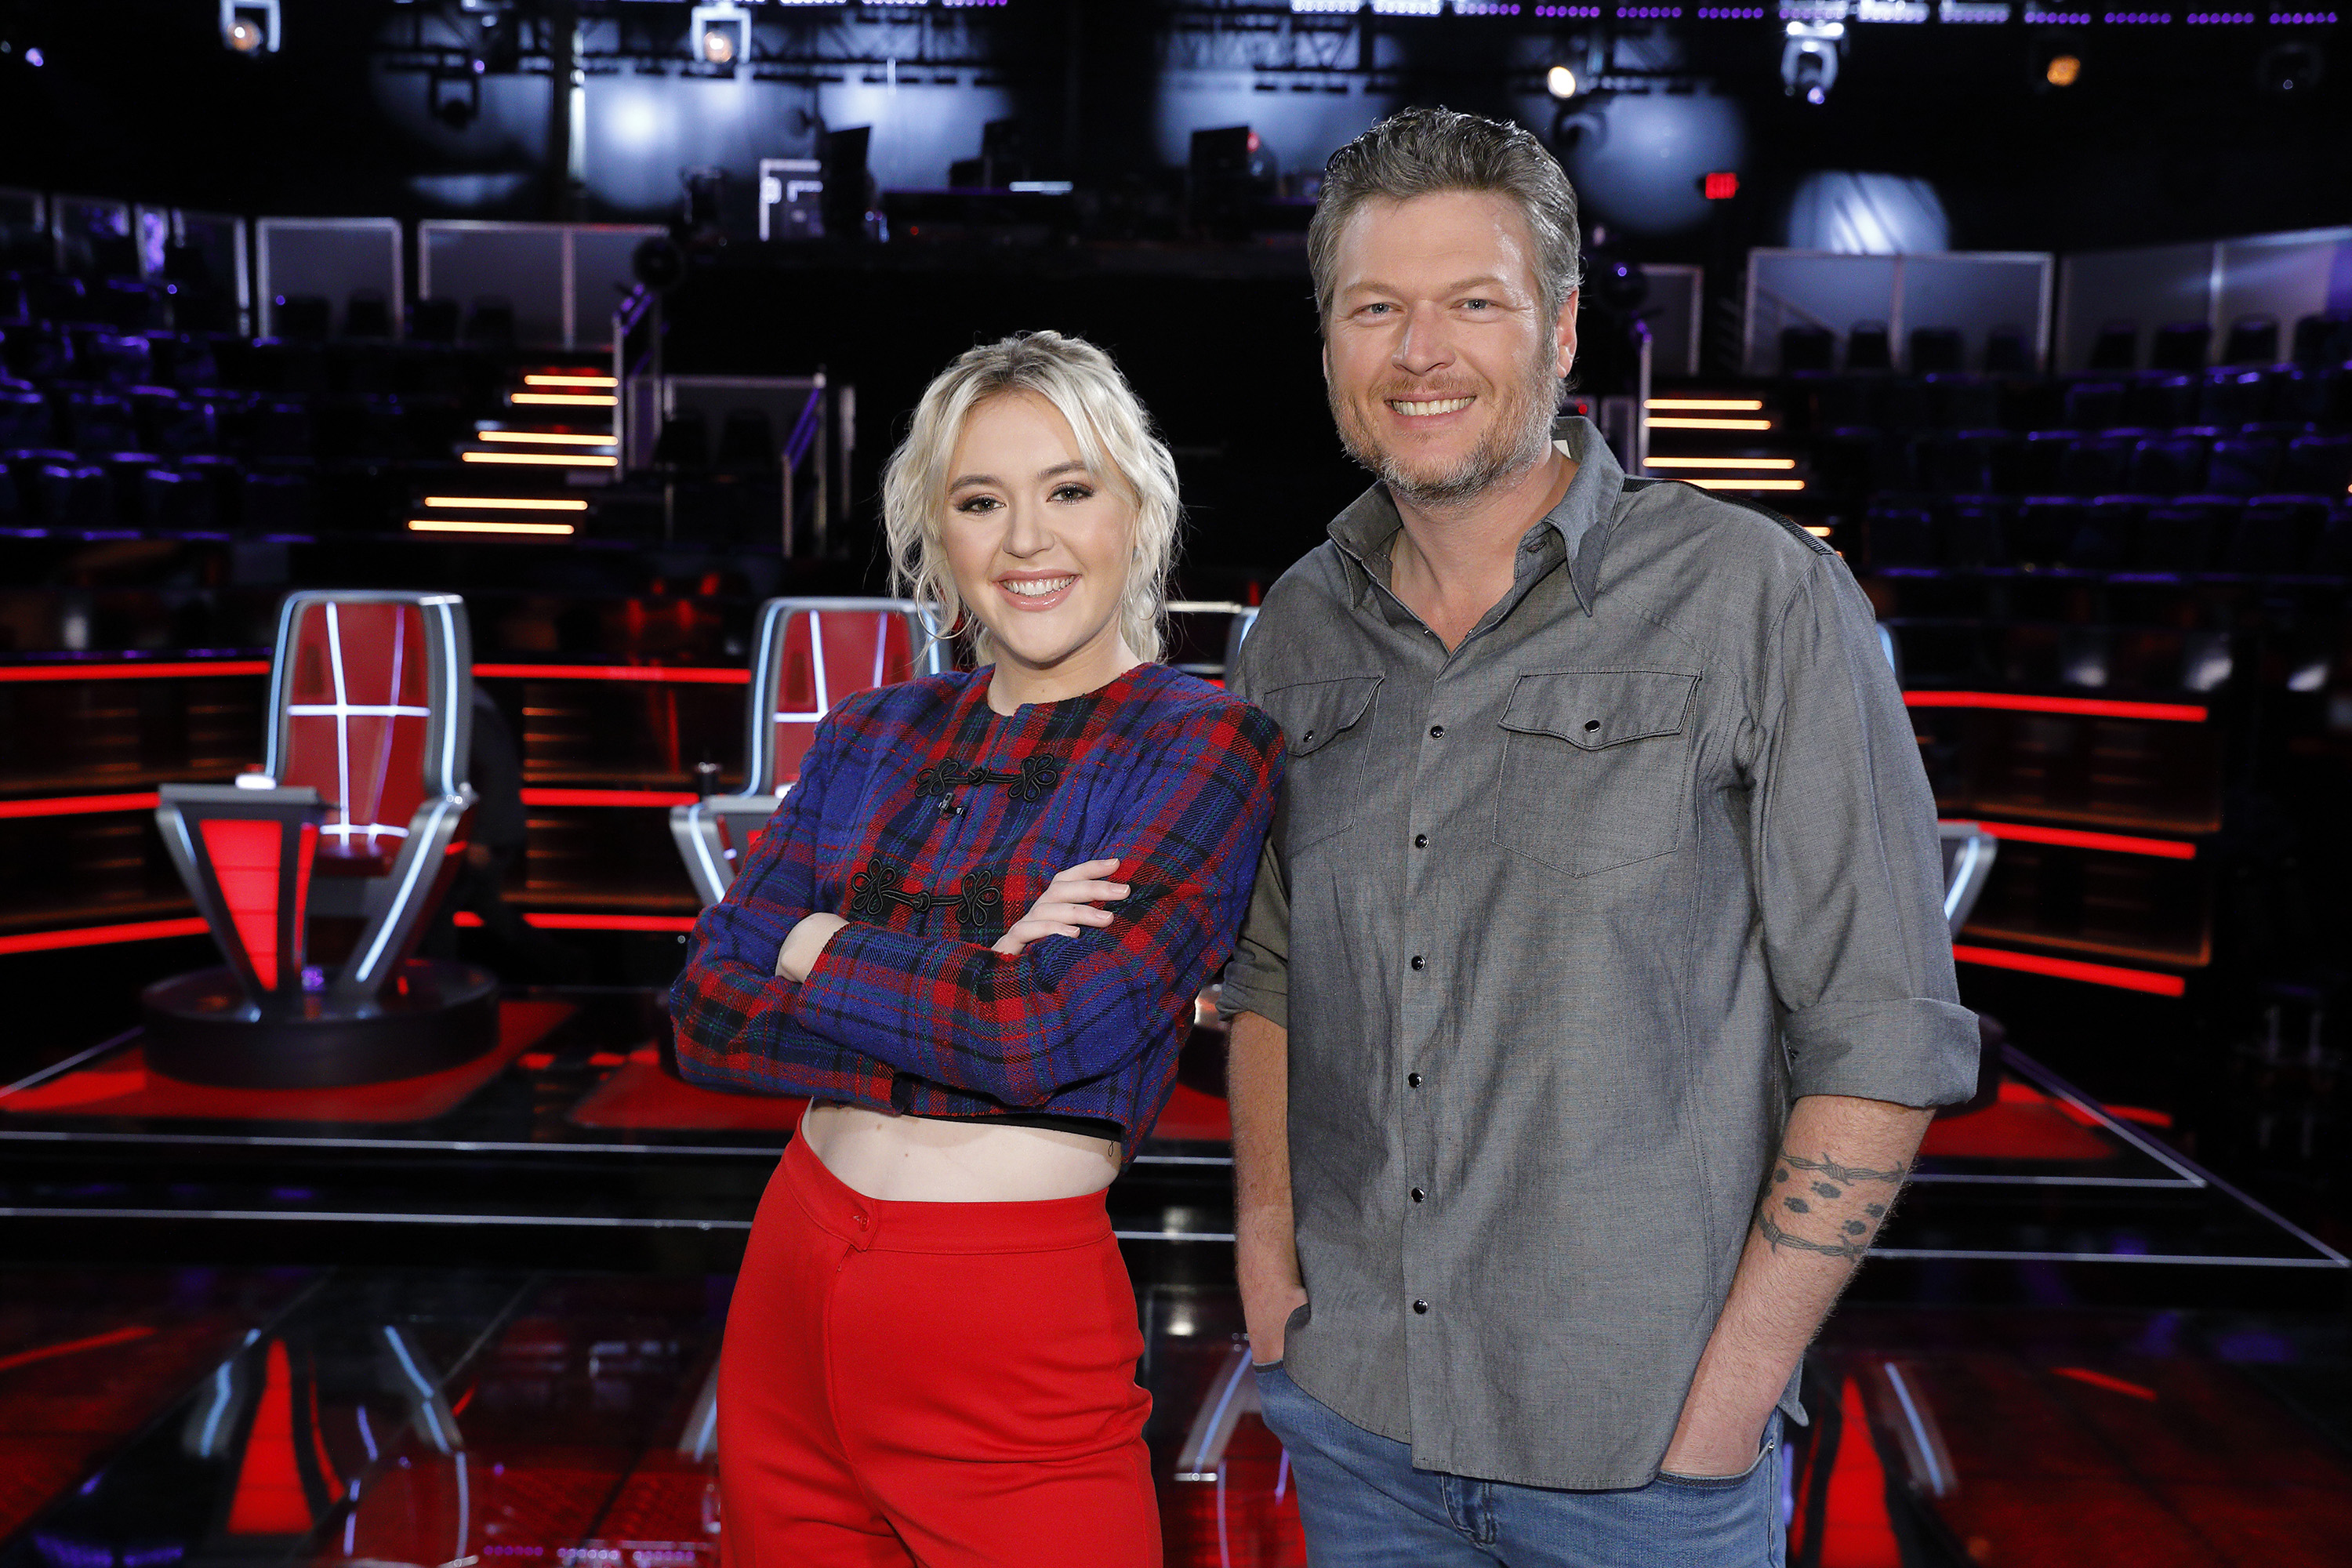 who won the voice last year